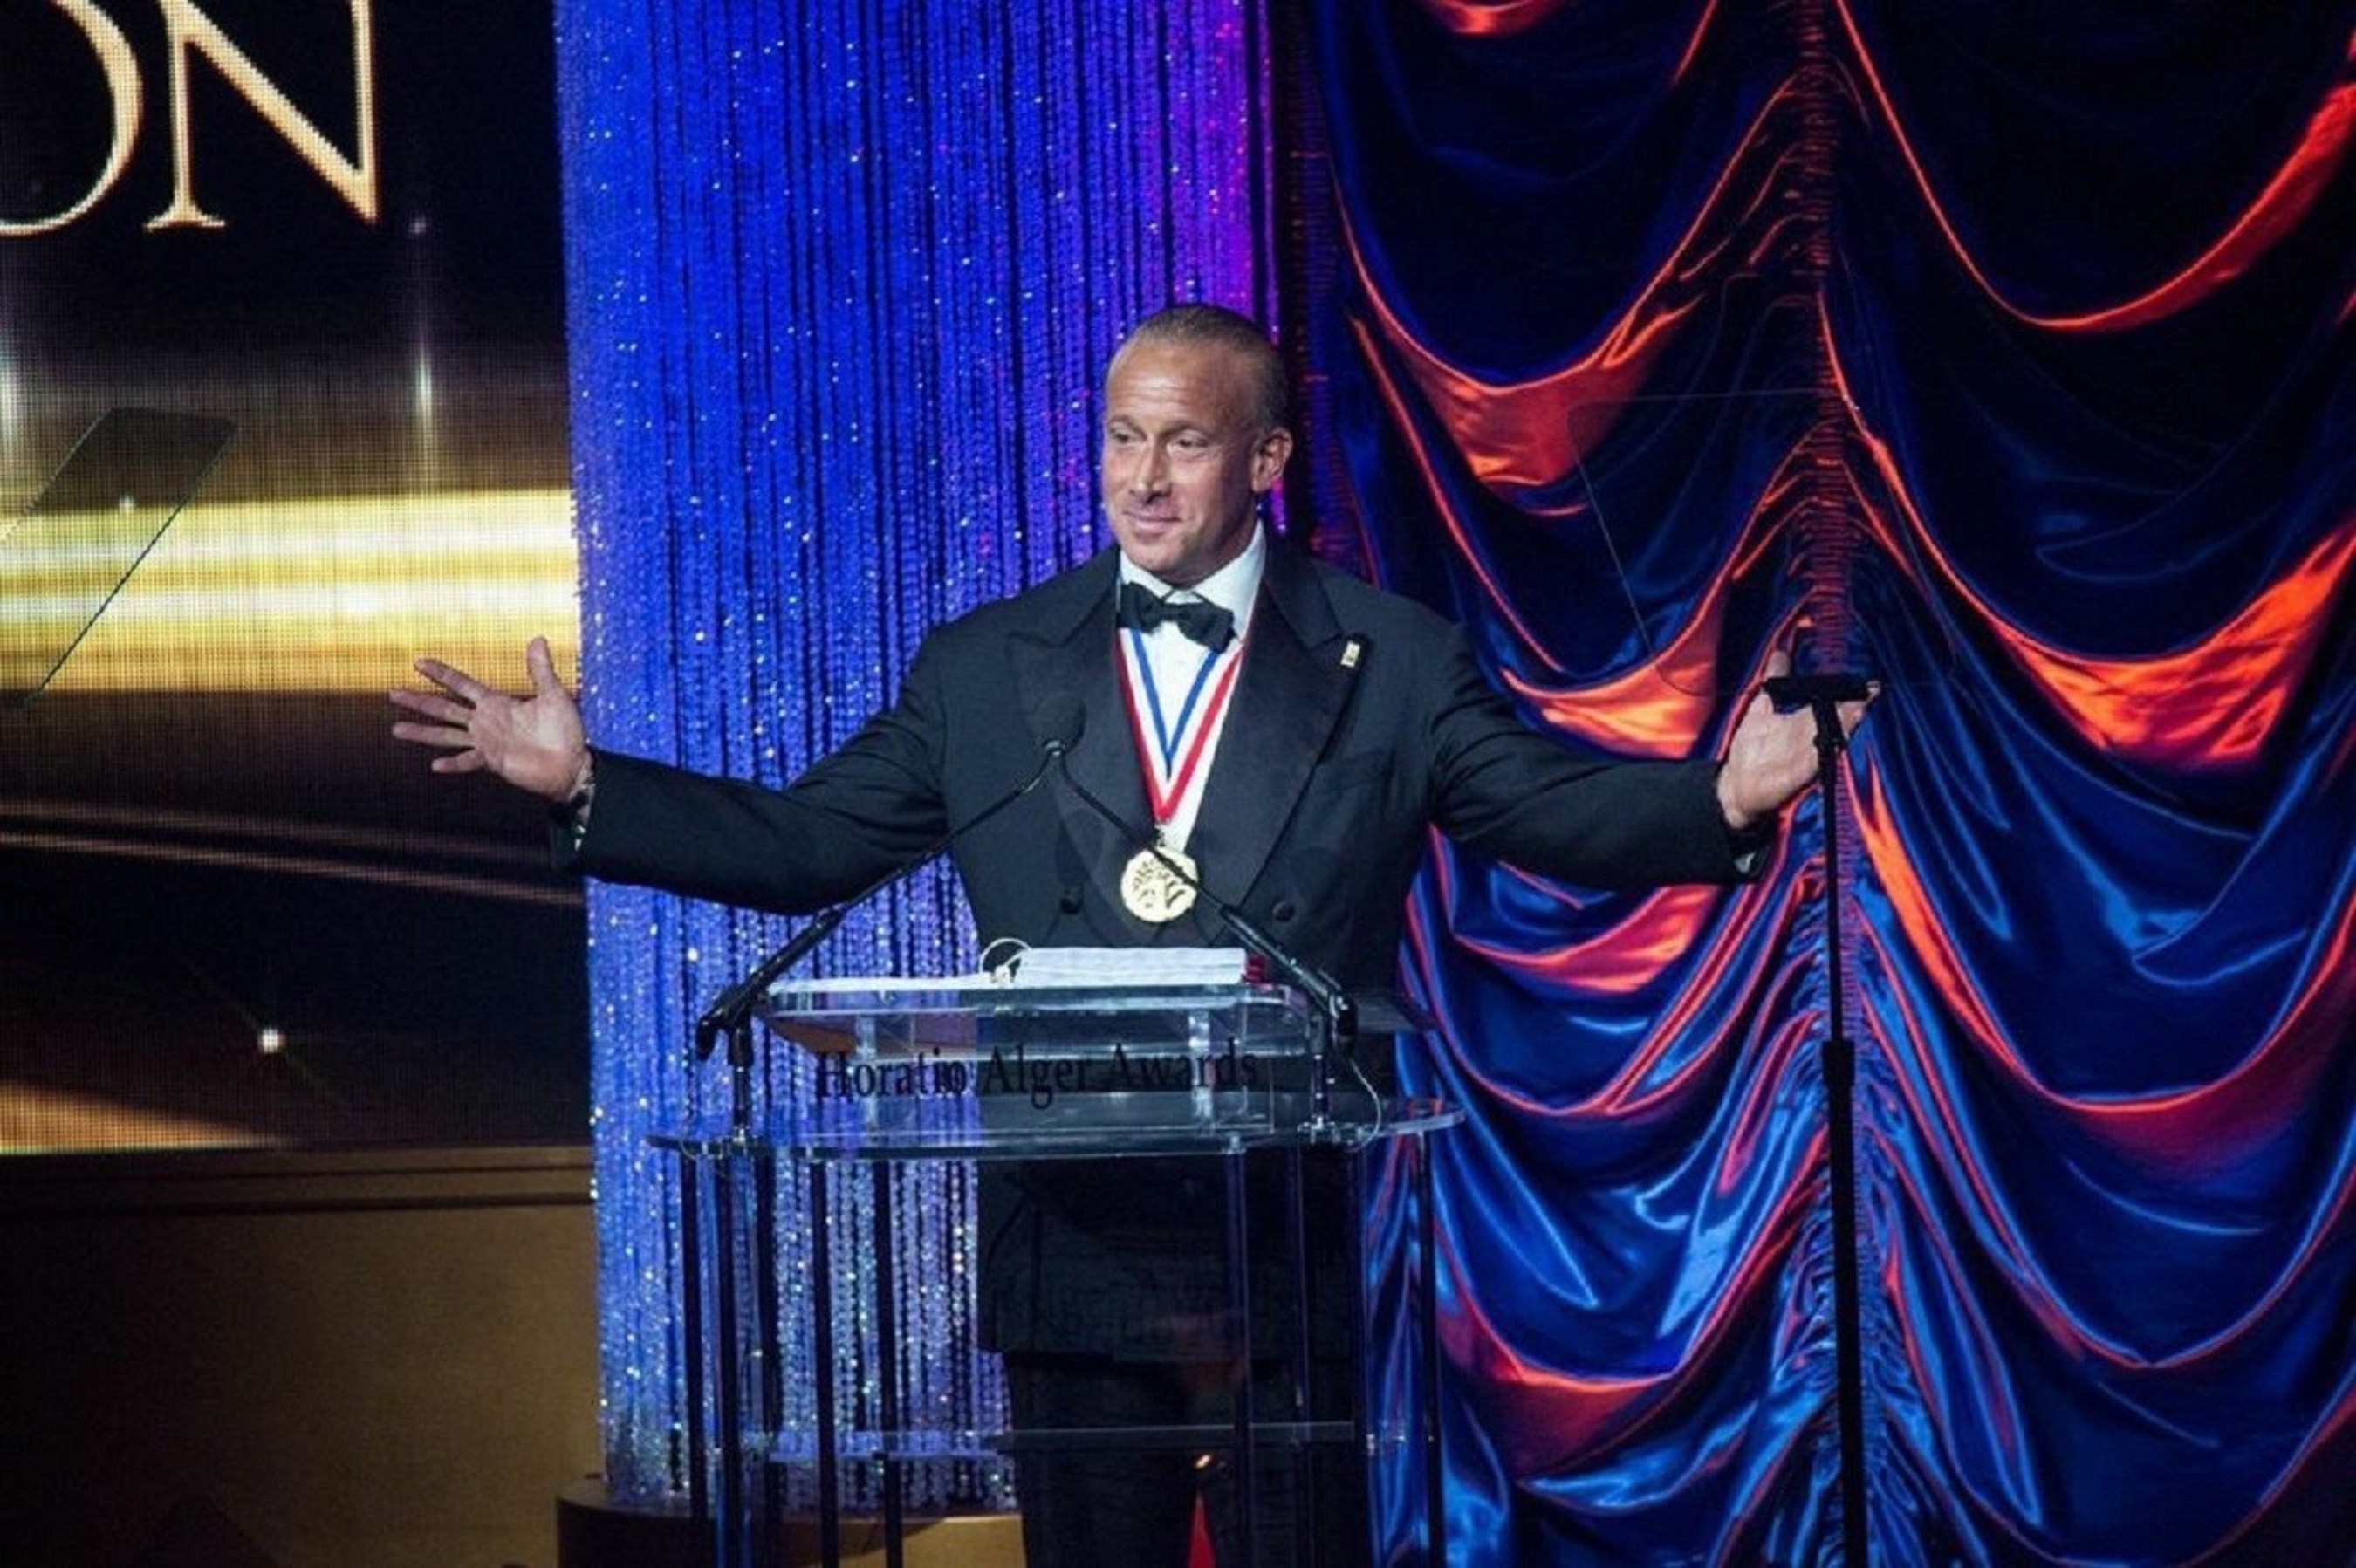 Mr. Zimmerman delivers his acceptance Speech after receiving the Horatio Alger Award last weekend in Washington, D.C. Photo Courtesy of Horatio Alger Association.